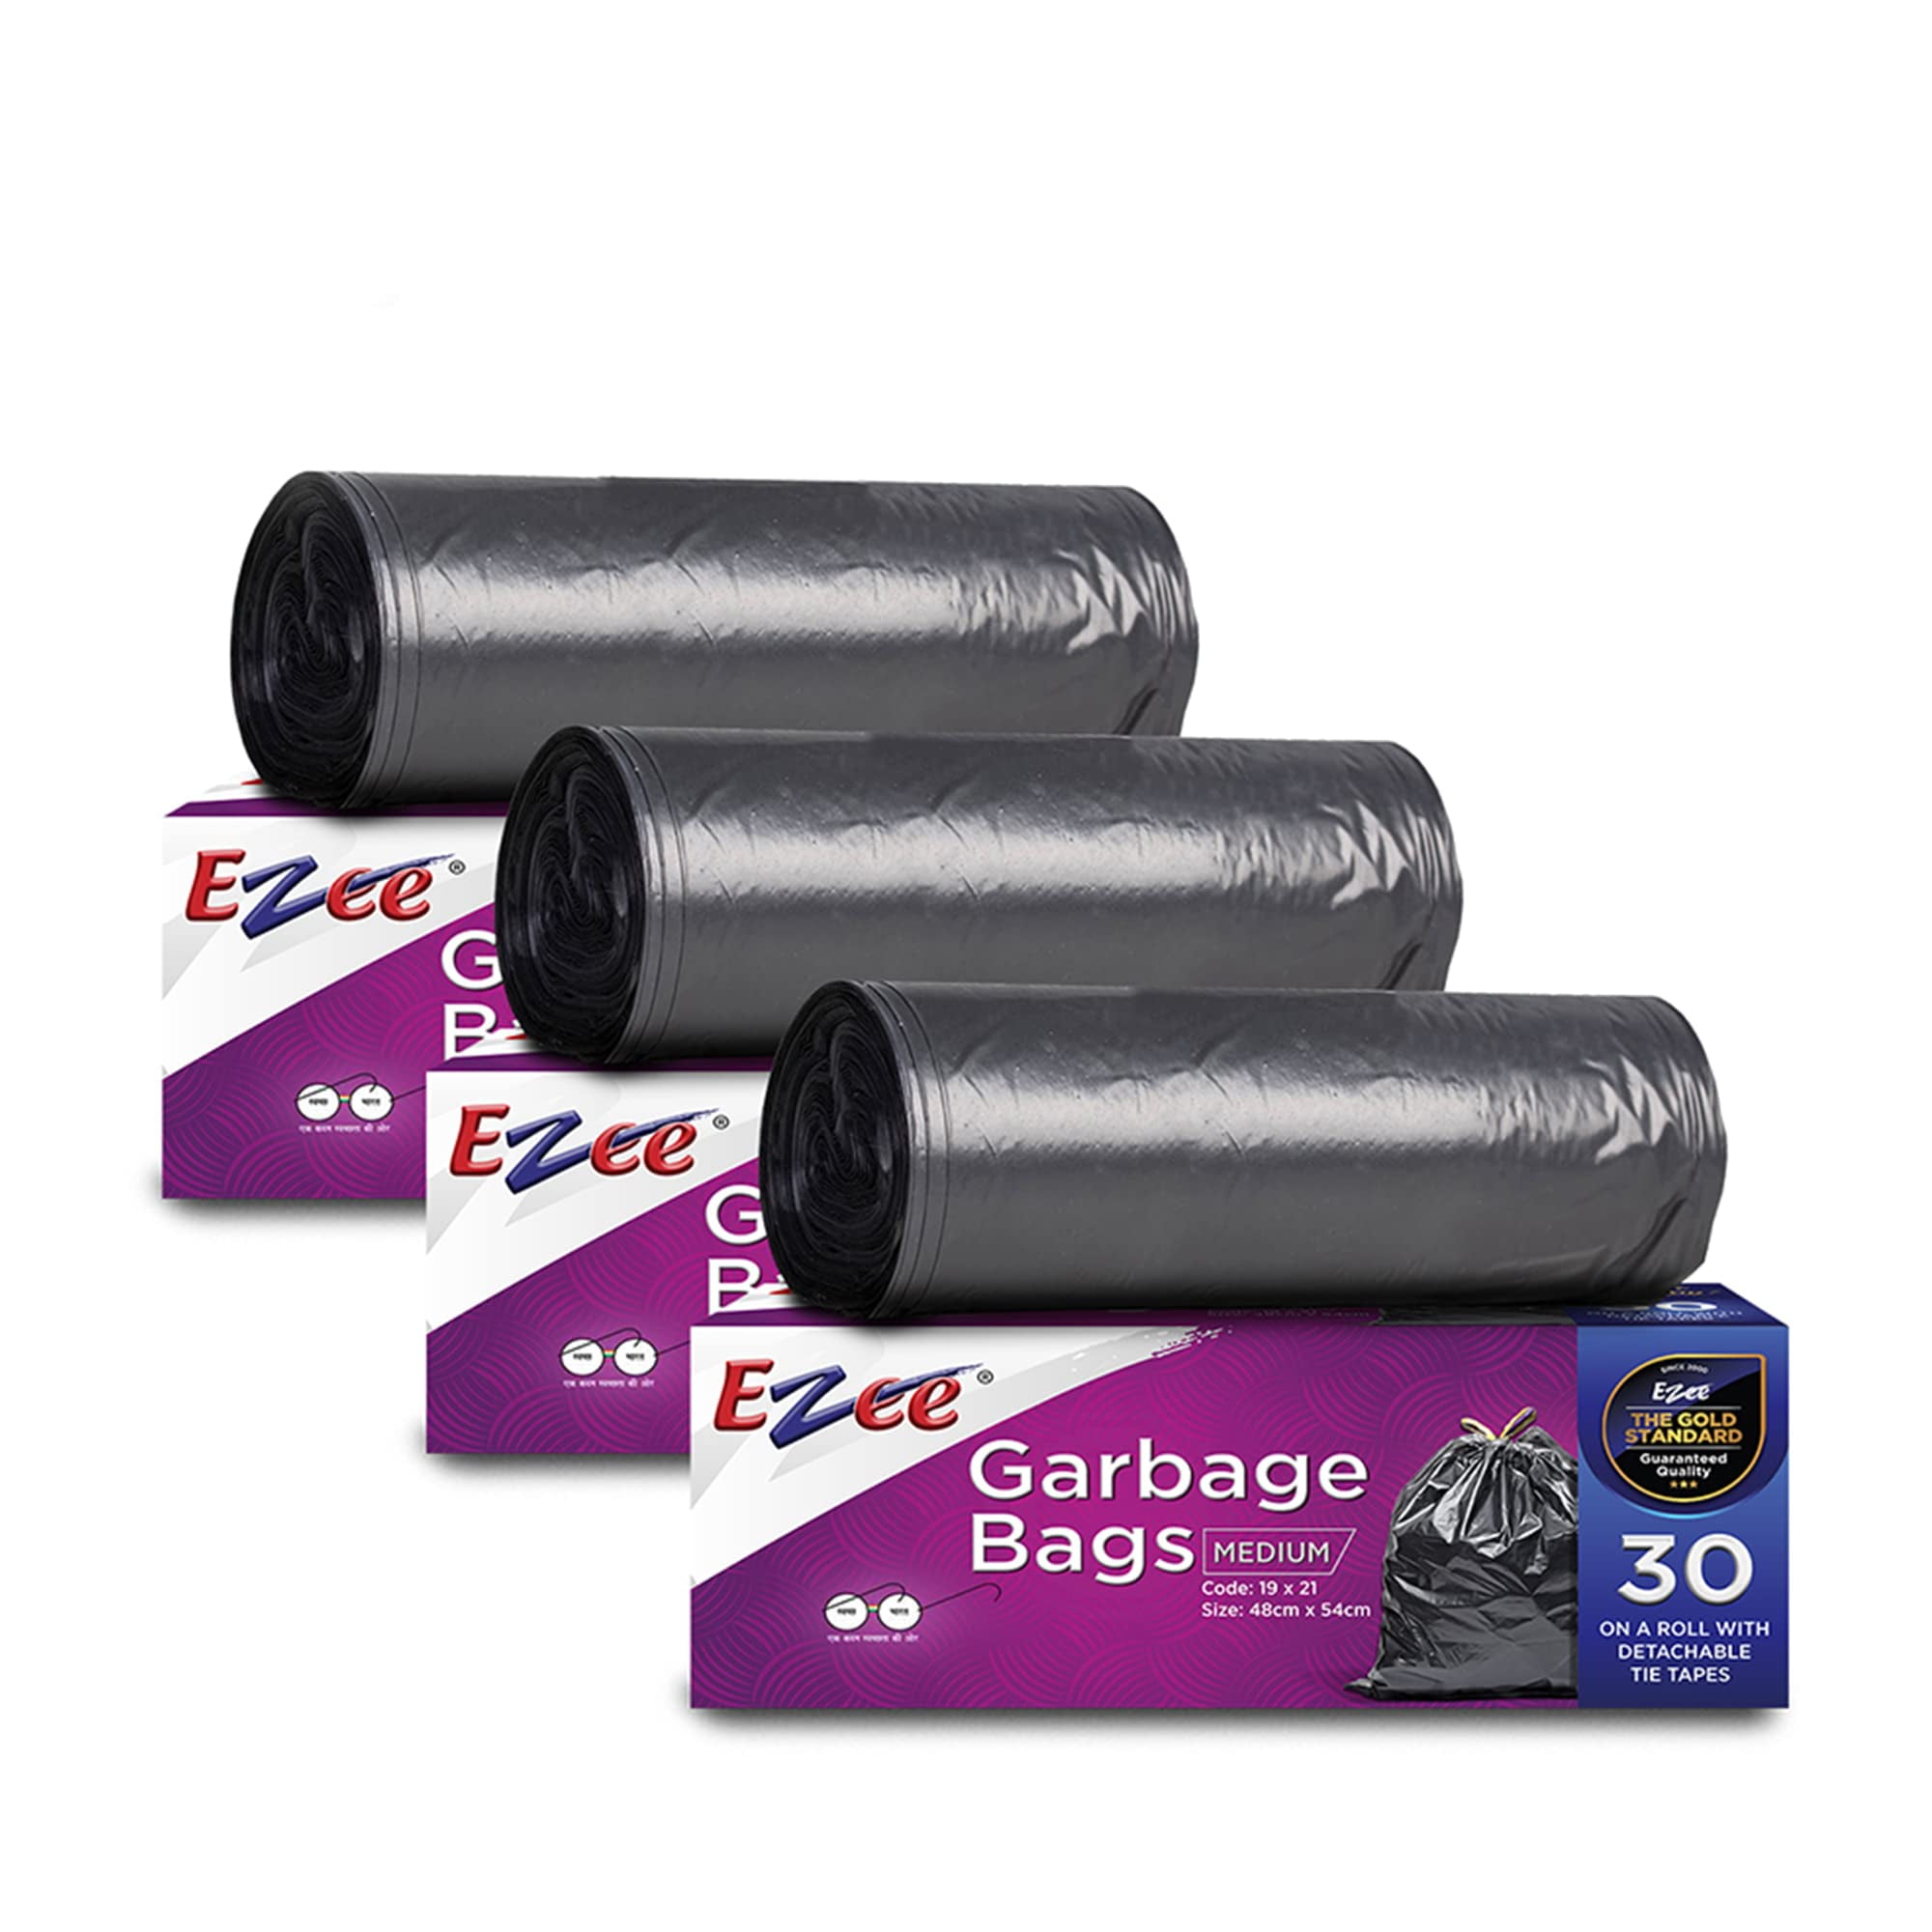 Ezee Black Garbage Bags For Dustbin, 90 Pcs, Medium 19 X 21 Inches